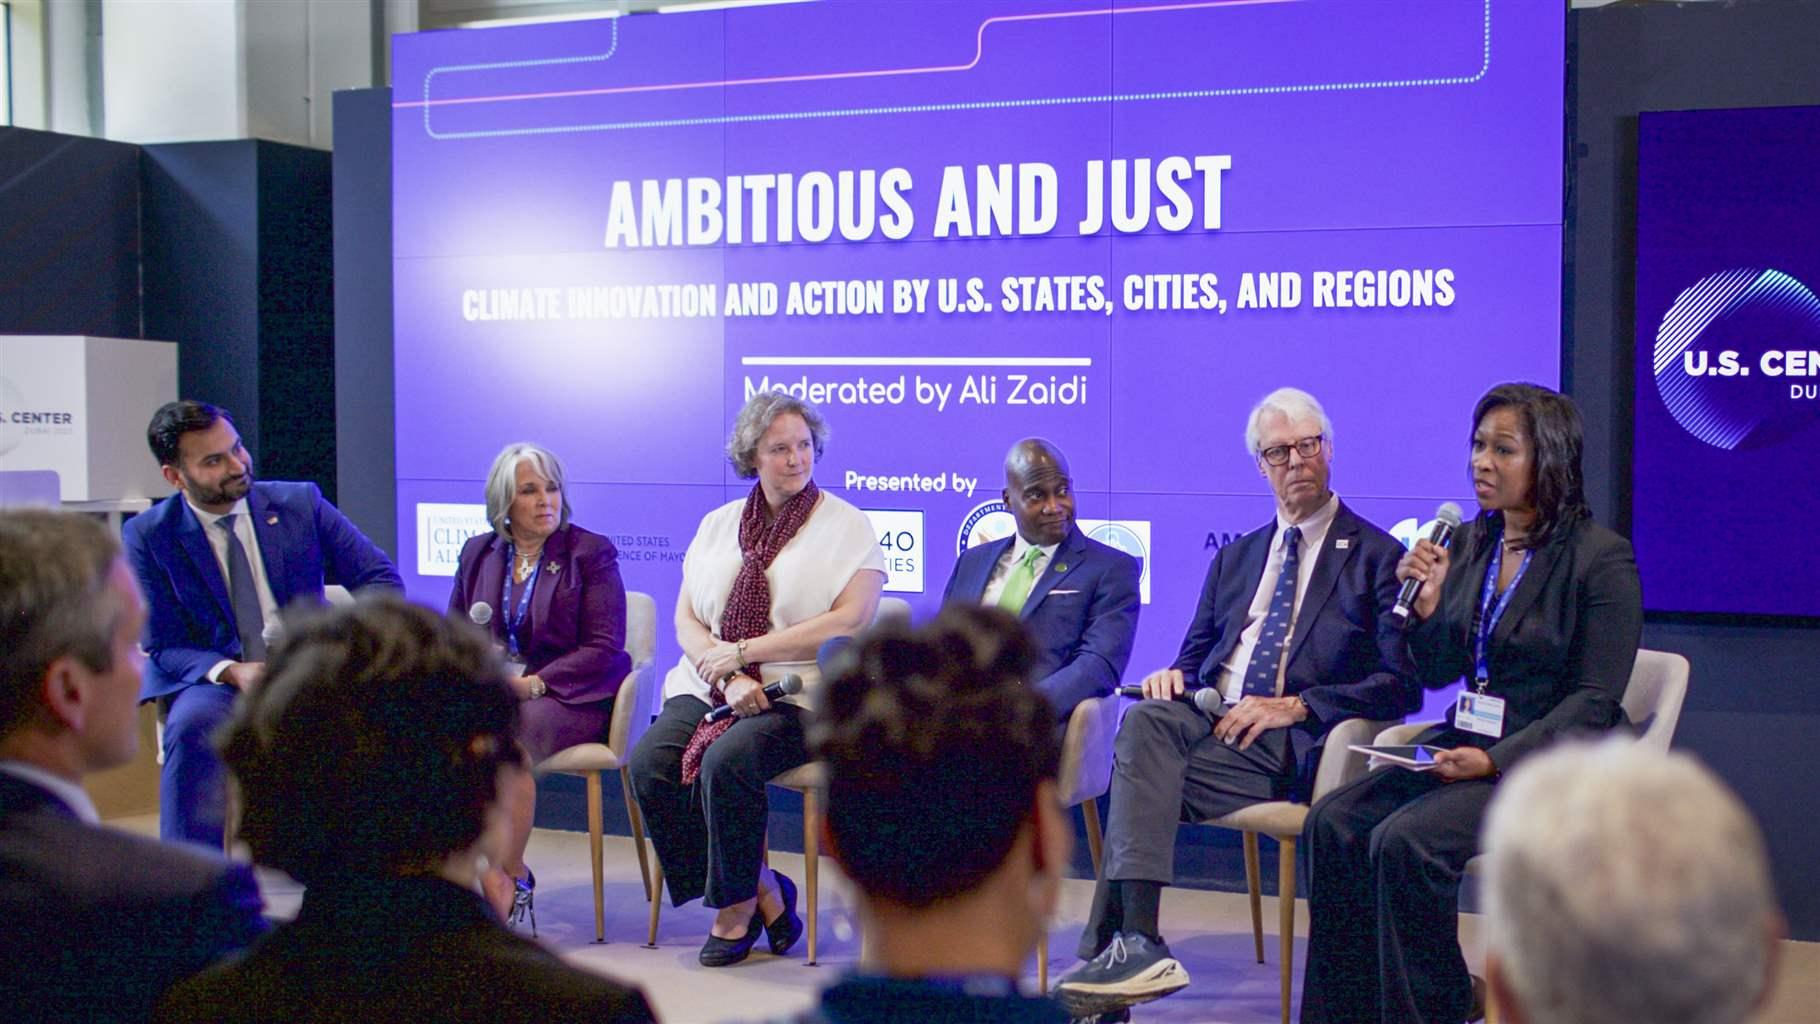 Six people sit on a stage at a panel discussion at an event, with five of them looking on as the person at the far right speaks into a microphone. Behind them is a large banner that says “Ambitious and Just: Climate Innovation and Action by U.S. States, Cities, and Regions.”